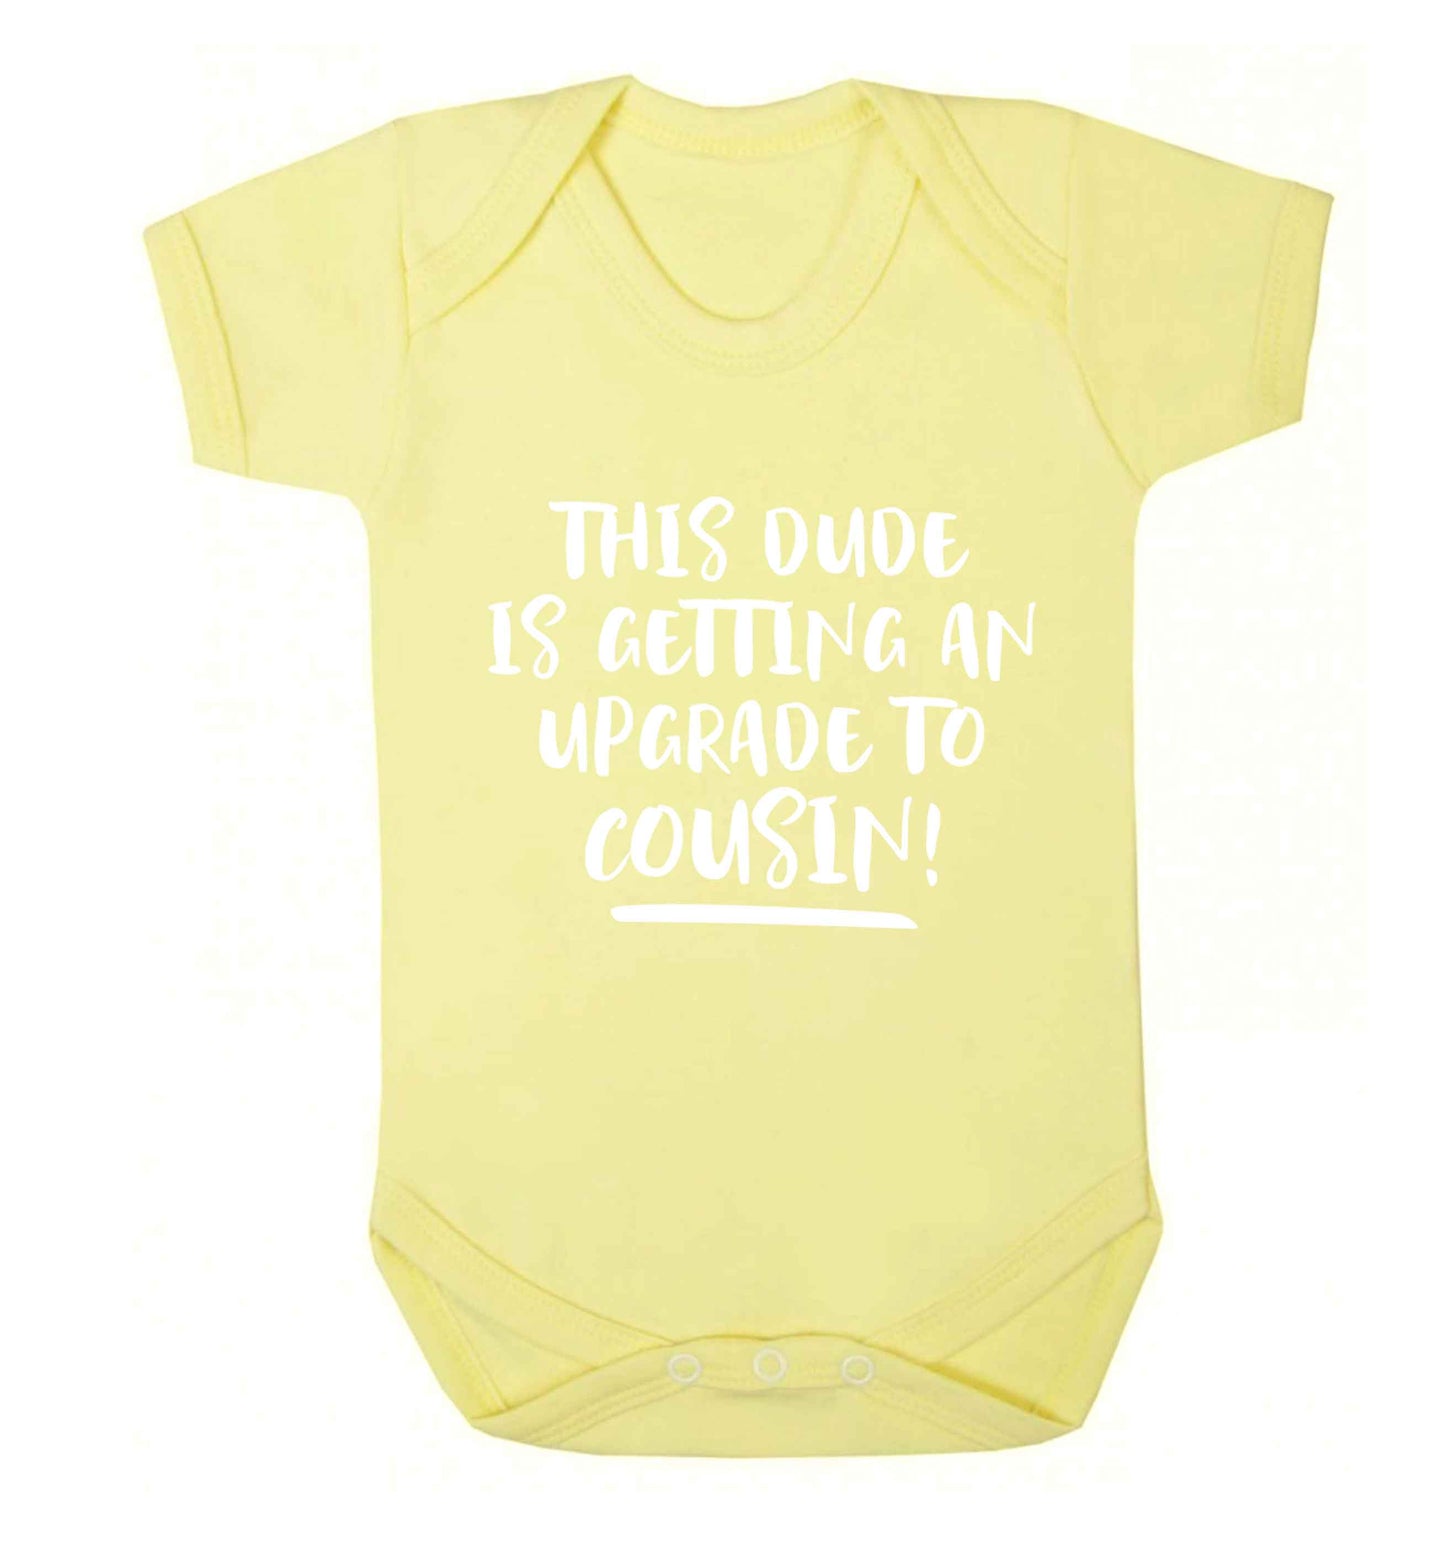 This dude is getting an upgrade to cousin! Baby Vest pale yellow 18-24 months